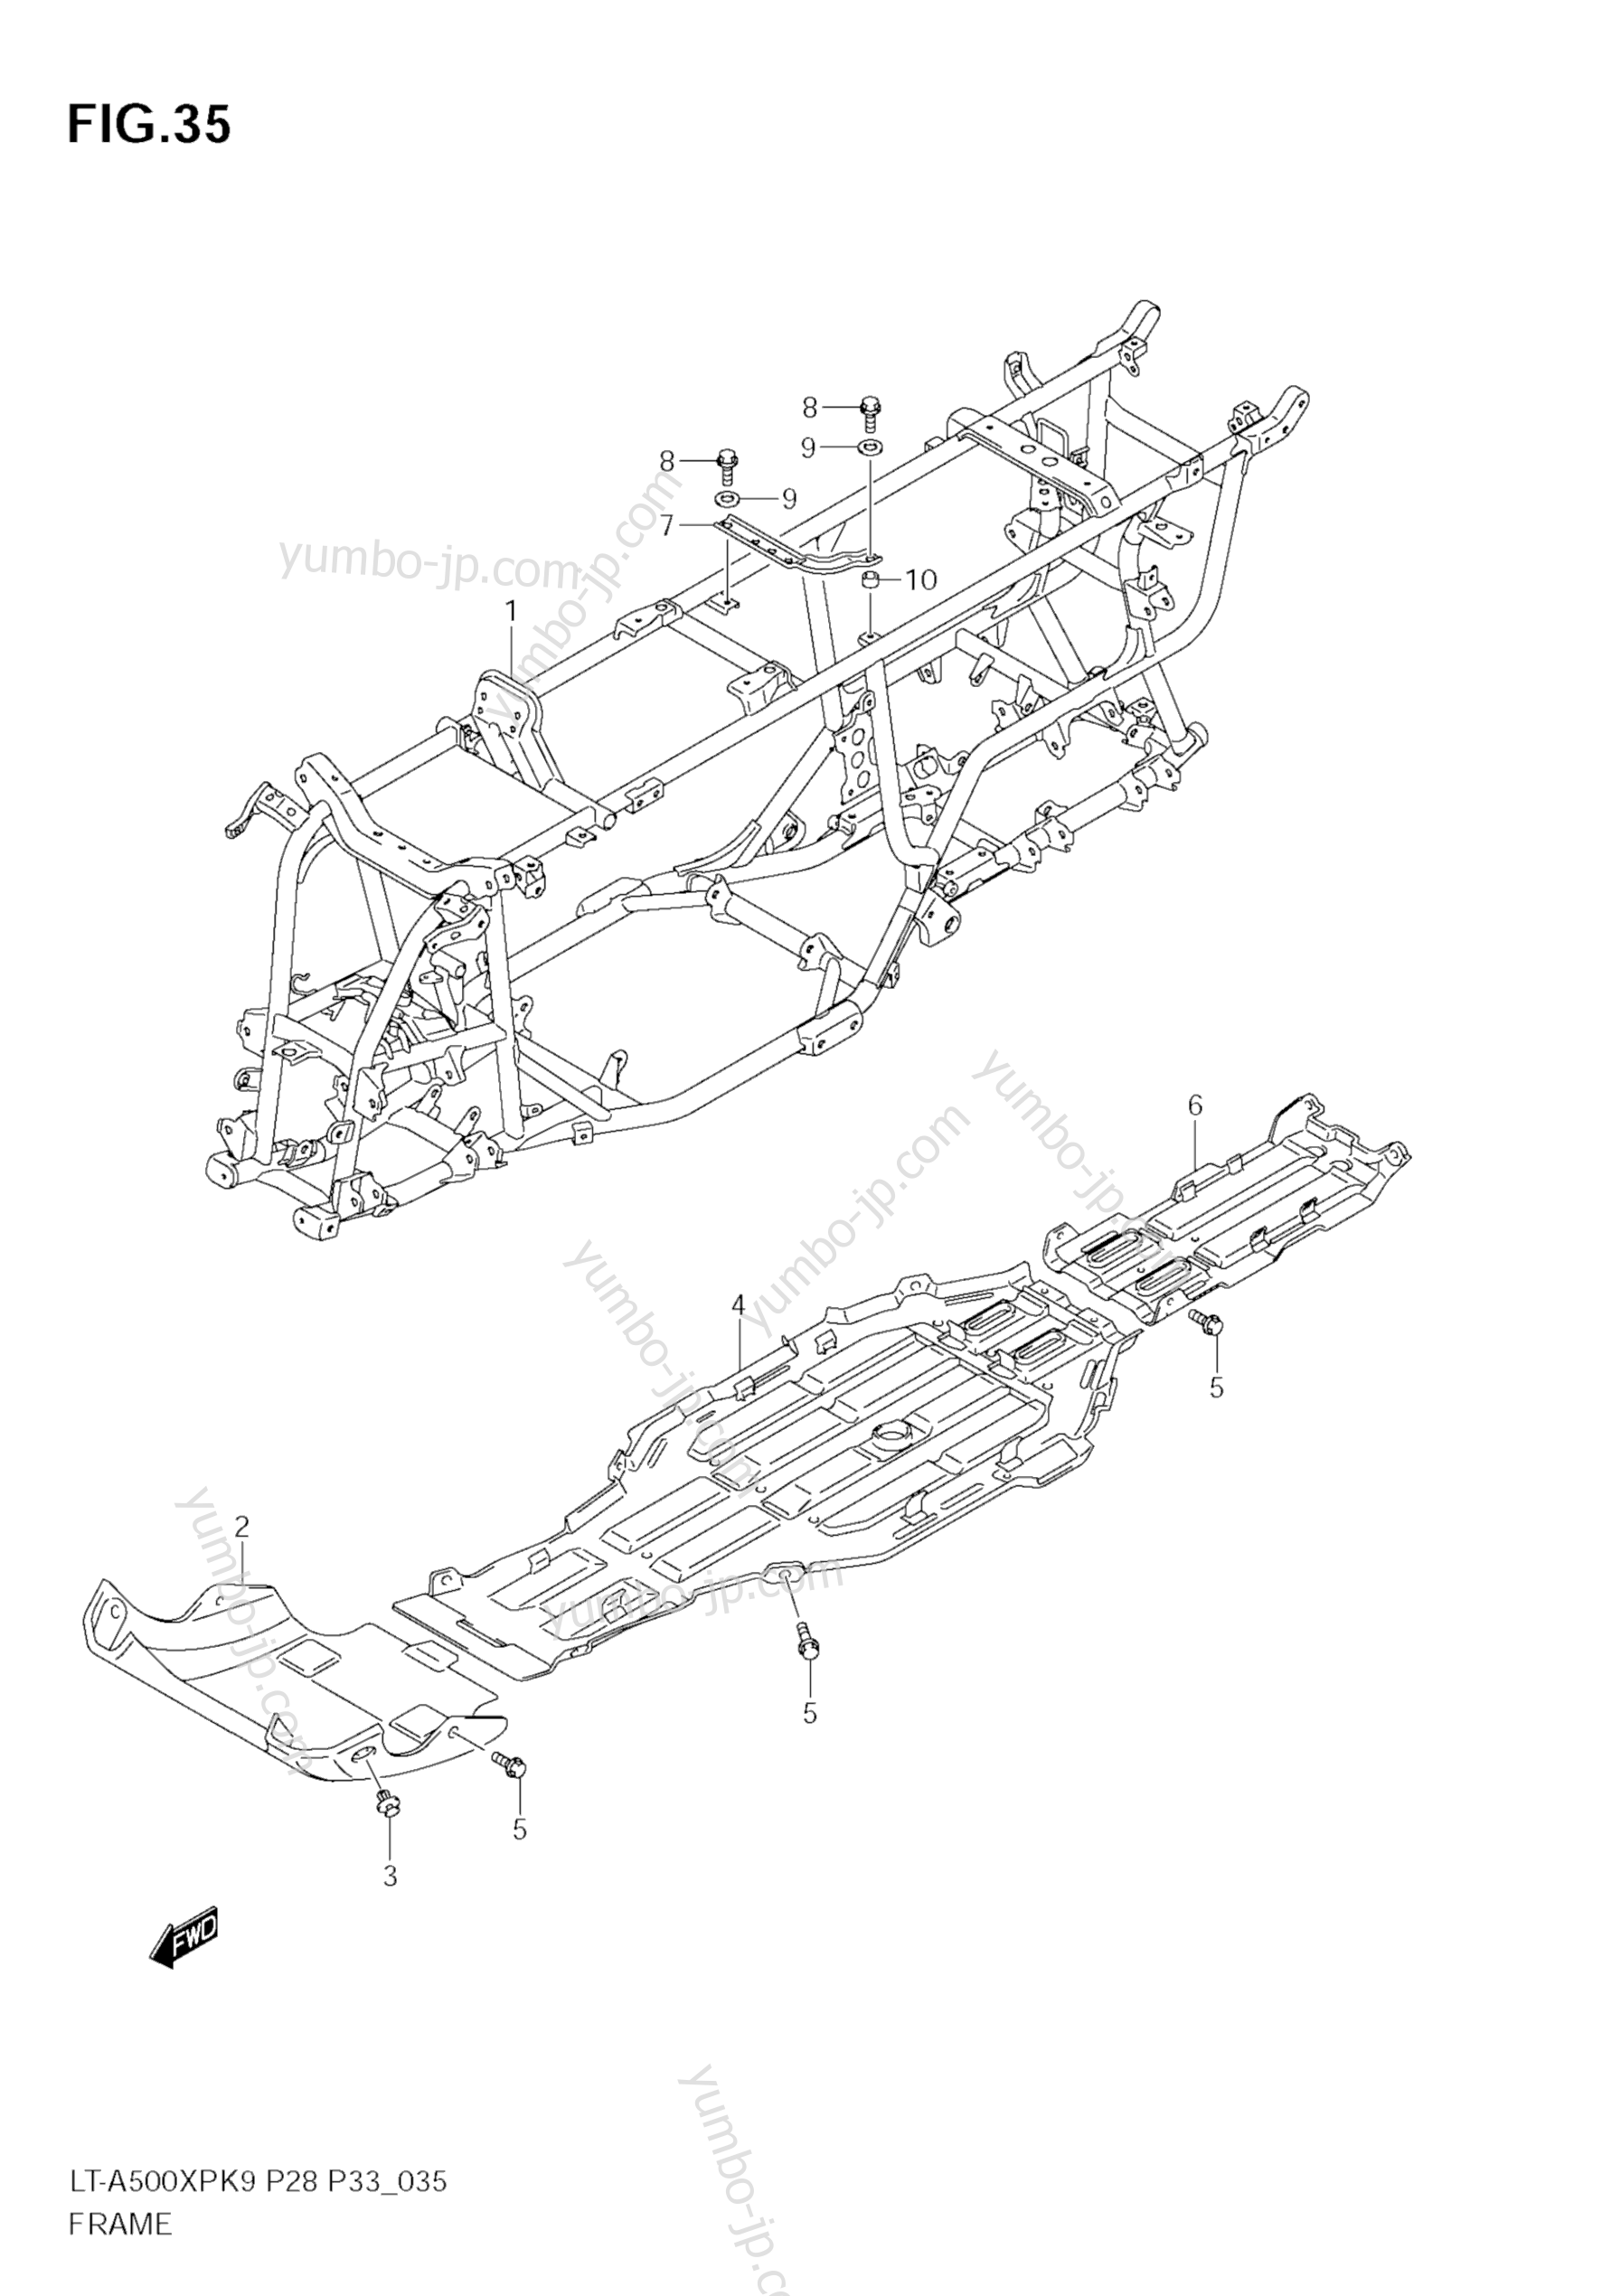 FRAME for ATVs SUZUKI KingQuad (LT-A500XP) 2009 year